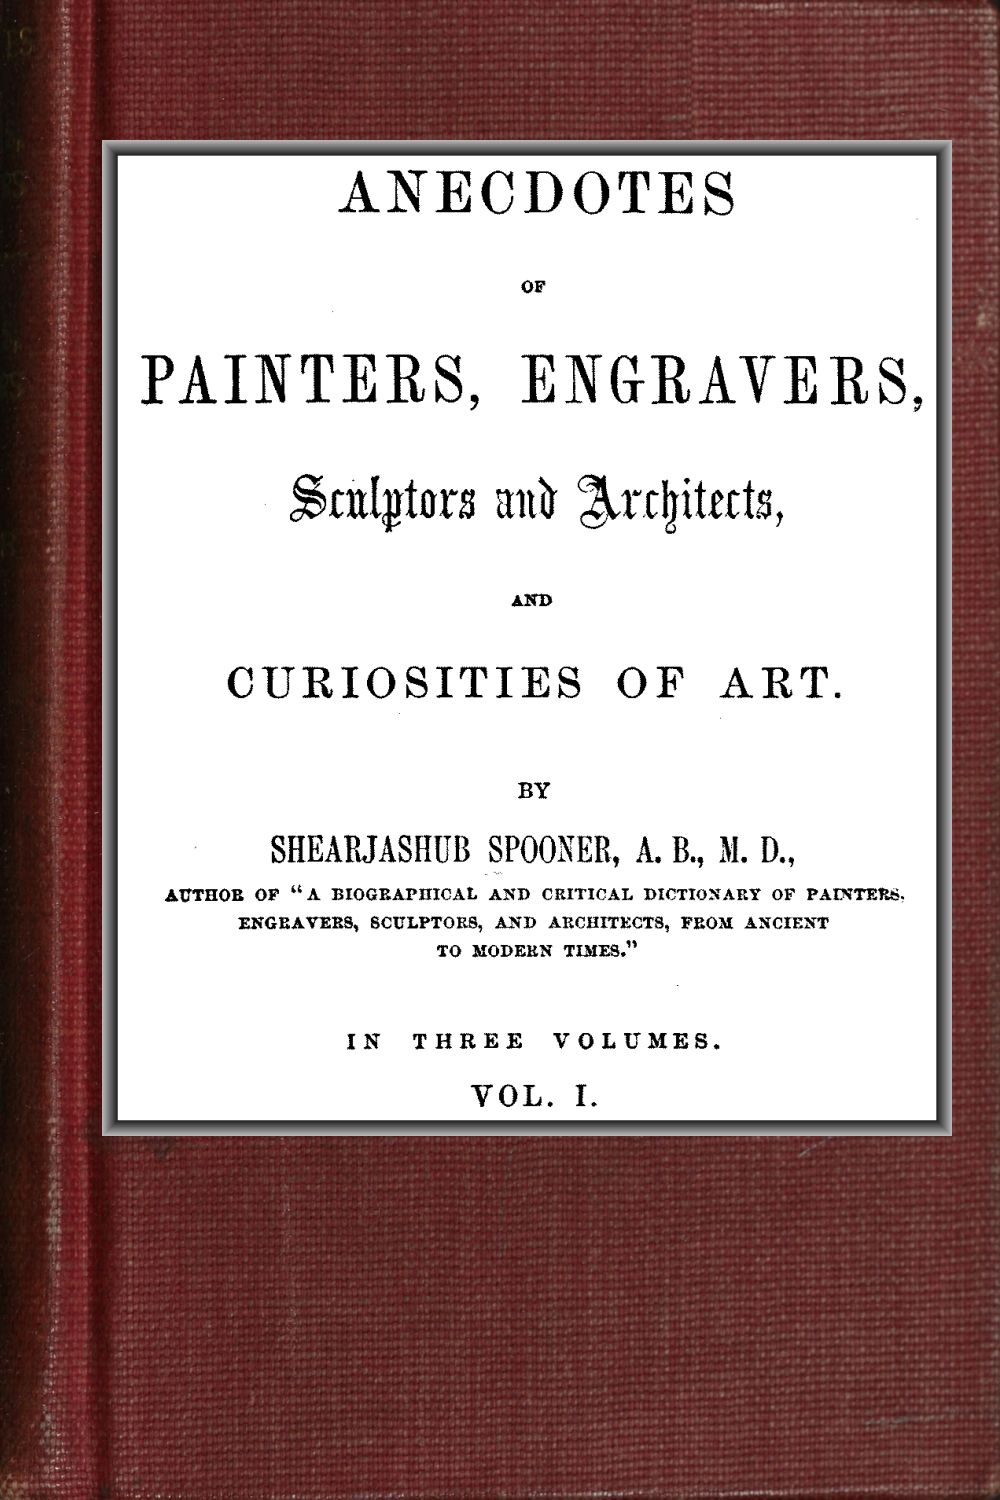 The Project Gutenberg eBook of Anecdotes of Painters, by Shearjashub Spooner. image